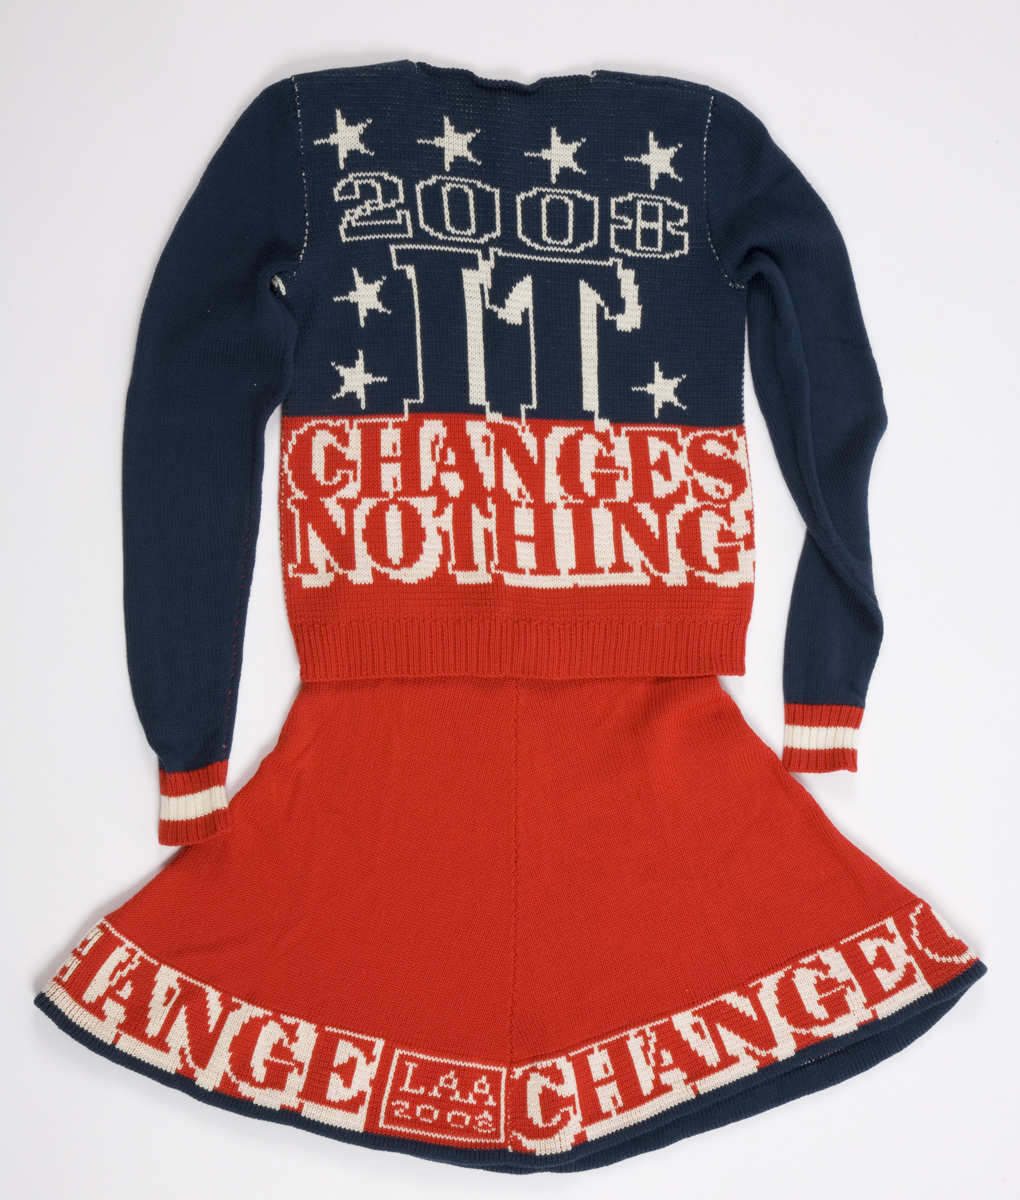  If Nothing Changes, It Changes Nothing (back), 2009 